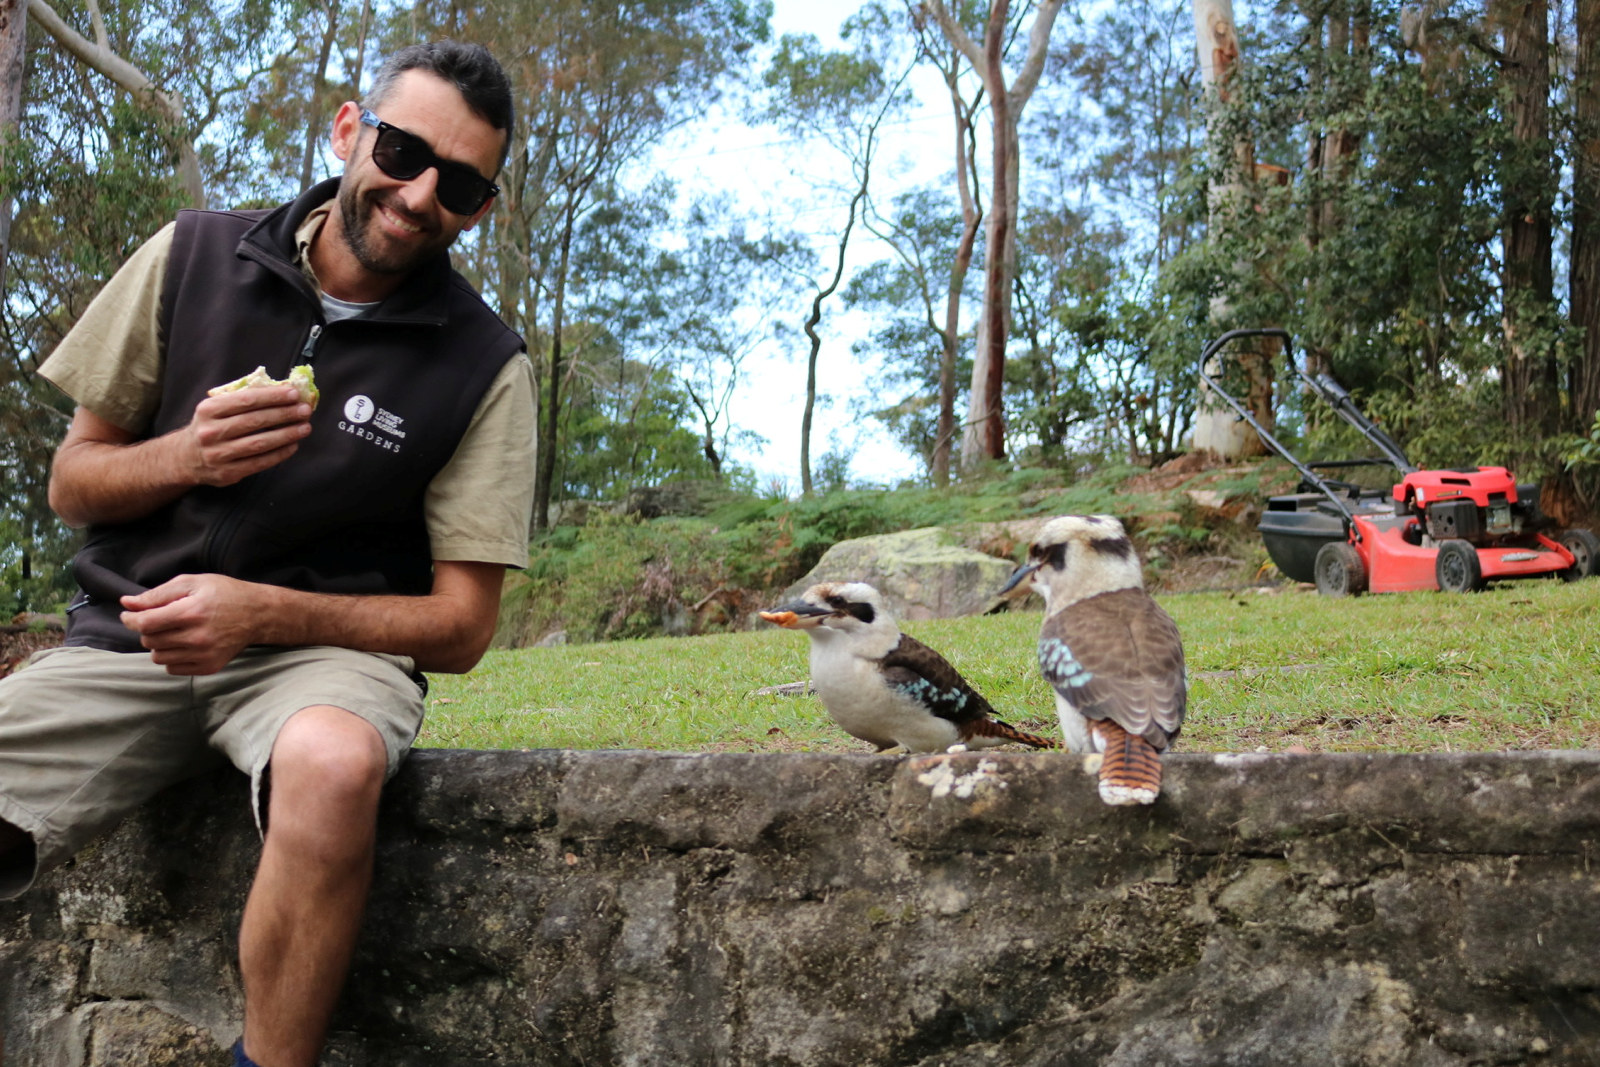 Two kookaburras sit on the wall next to Leigh eagerly awaiting any food